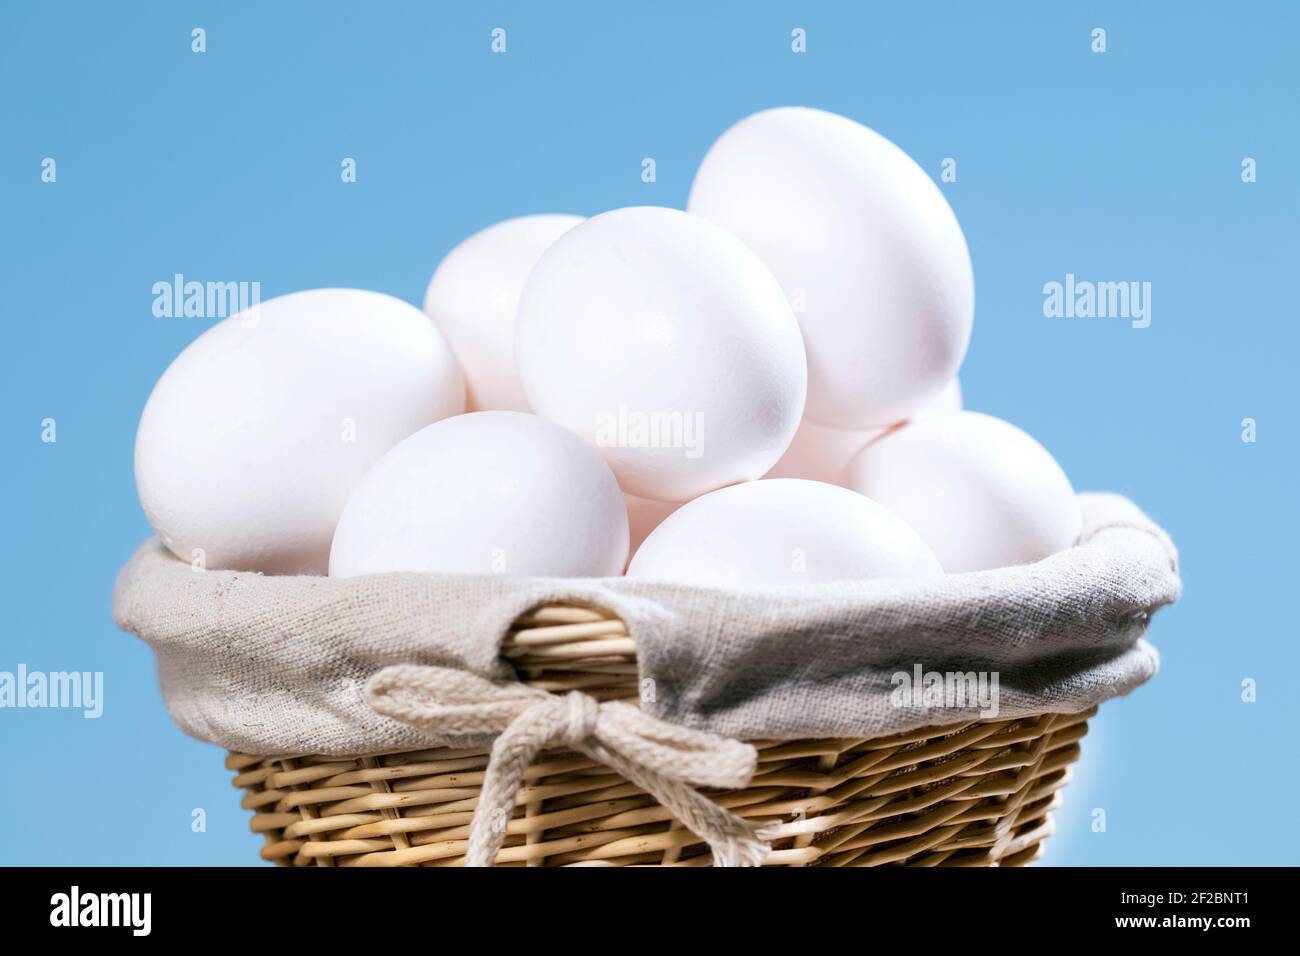 Chicken Eggs in a straw Basket, A lot of White Fresh Raw eggs in a container, Natural Eko Product, Easter preparing Copyspace Stock Photo